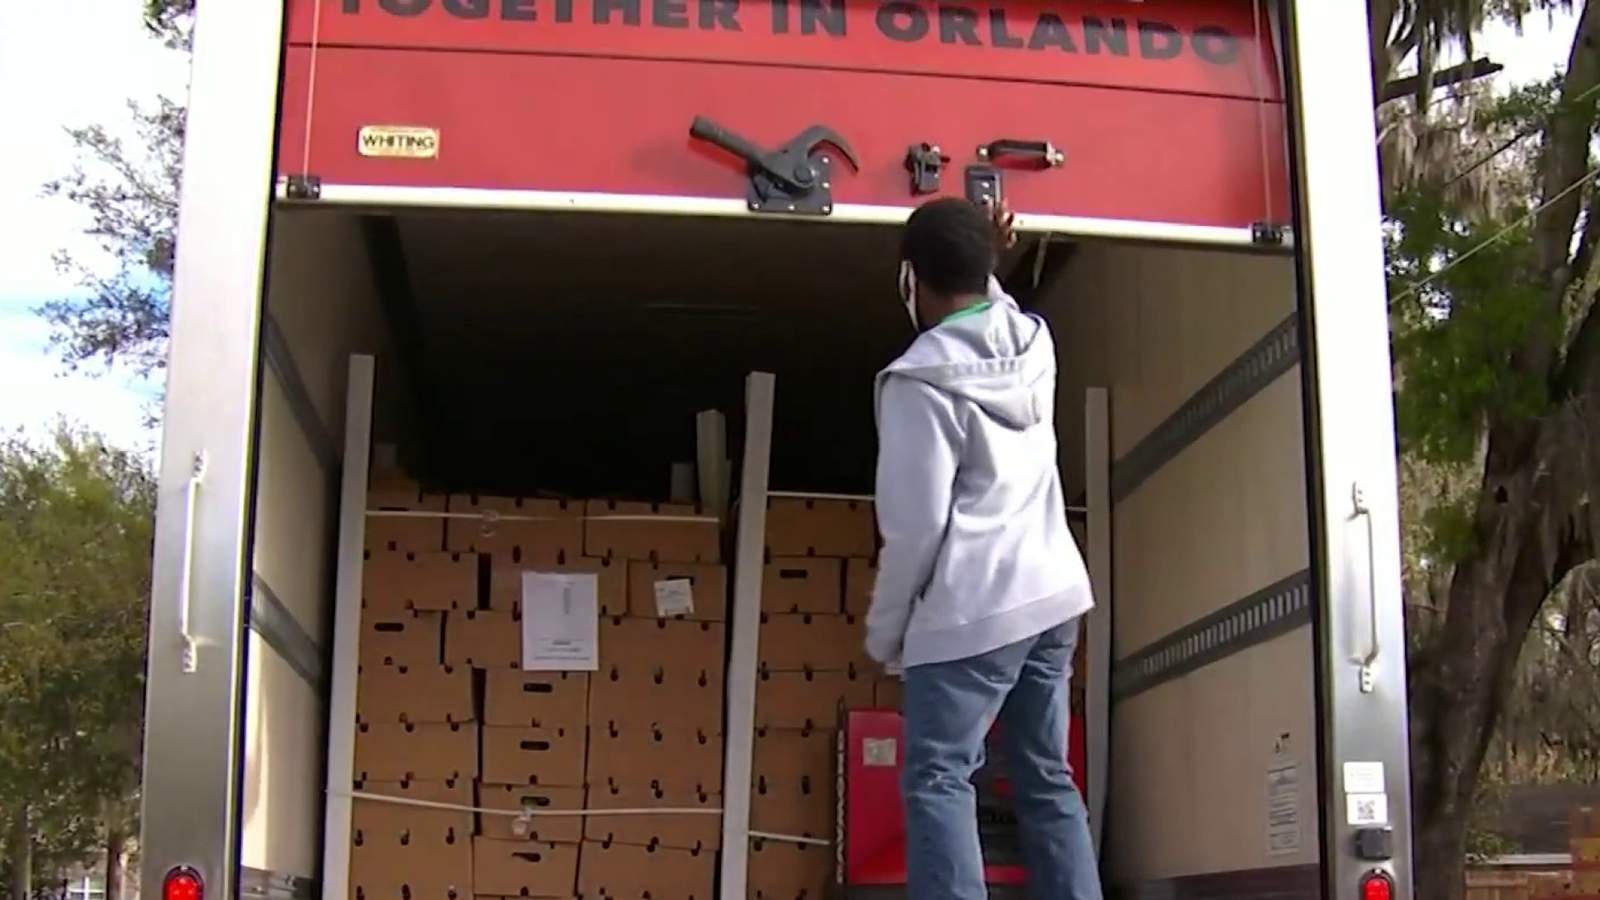 New refrigerated truck delivers hundreds of meals to Seminole County families in need